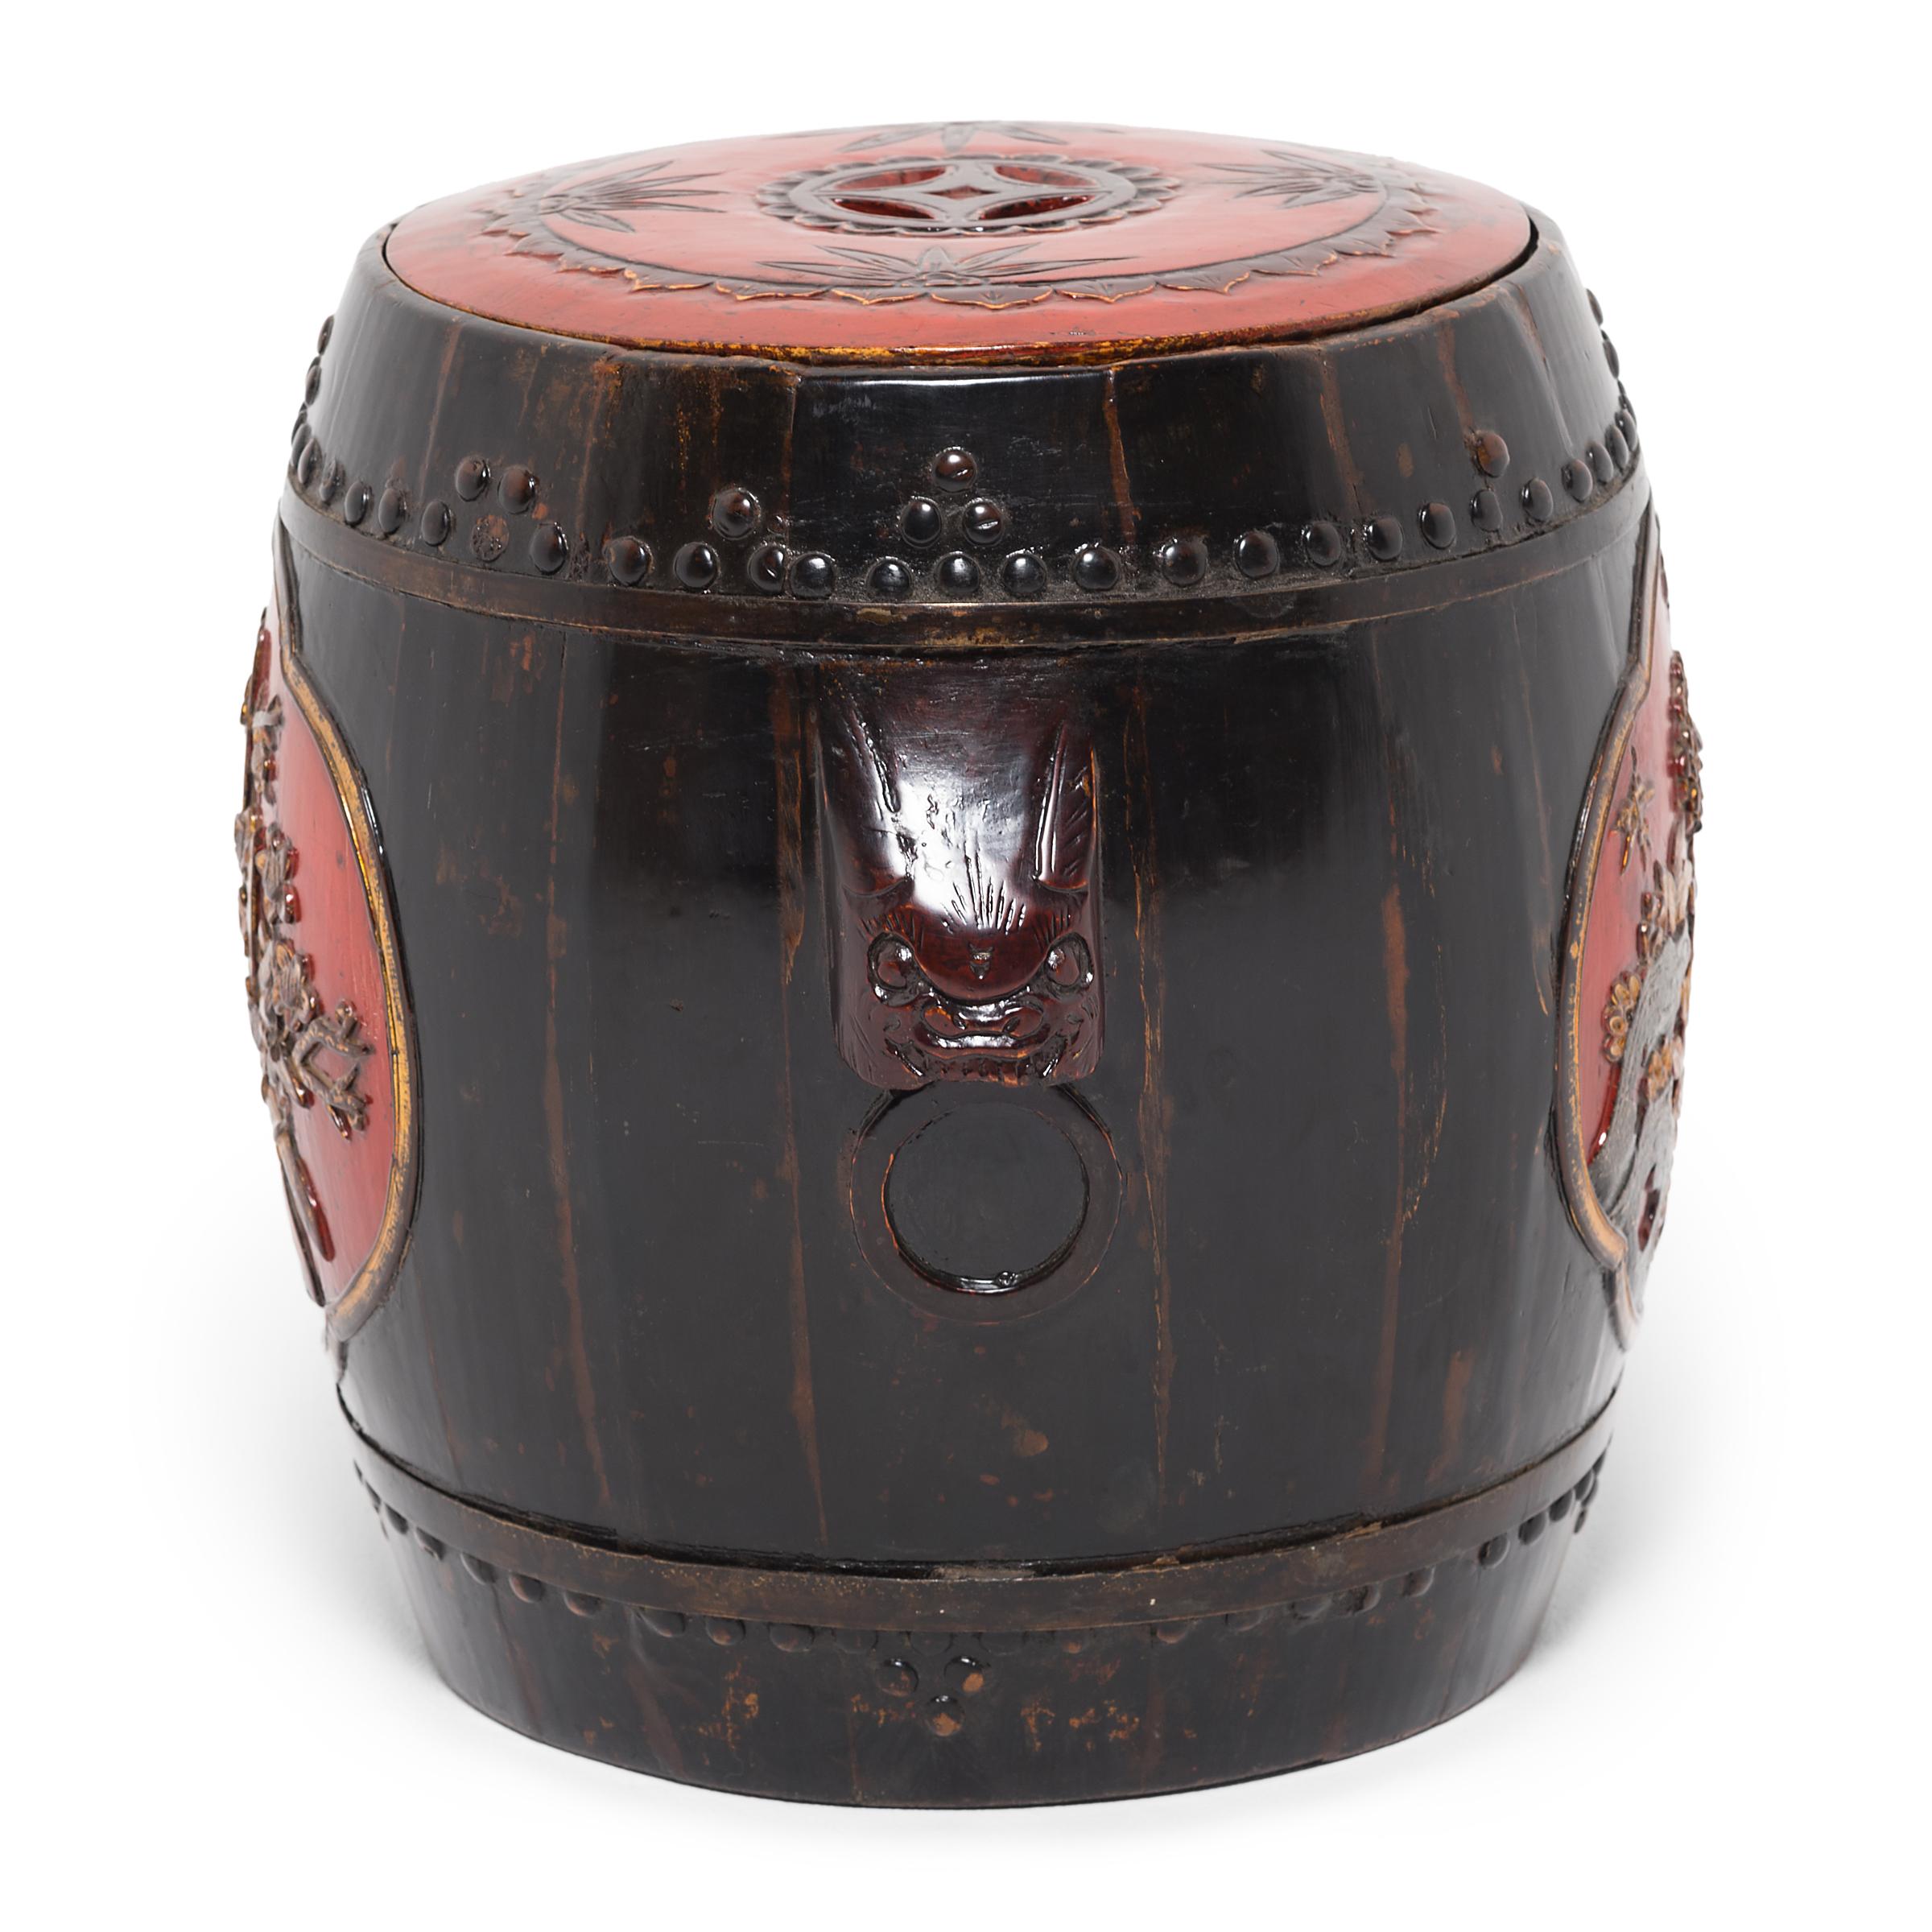 Lacquered Chinese Painted Drum Stool with Blessings, c. 1850 For Sale